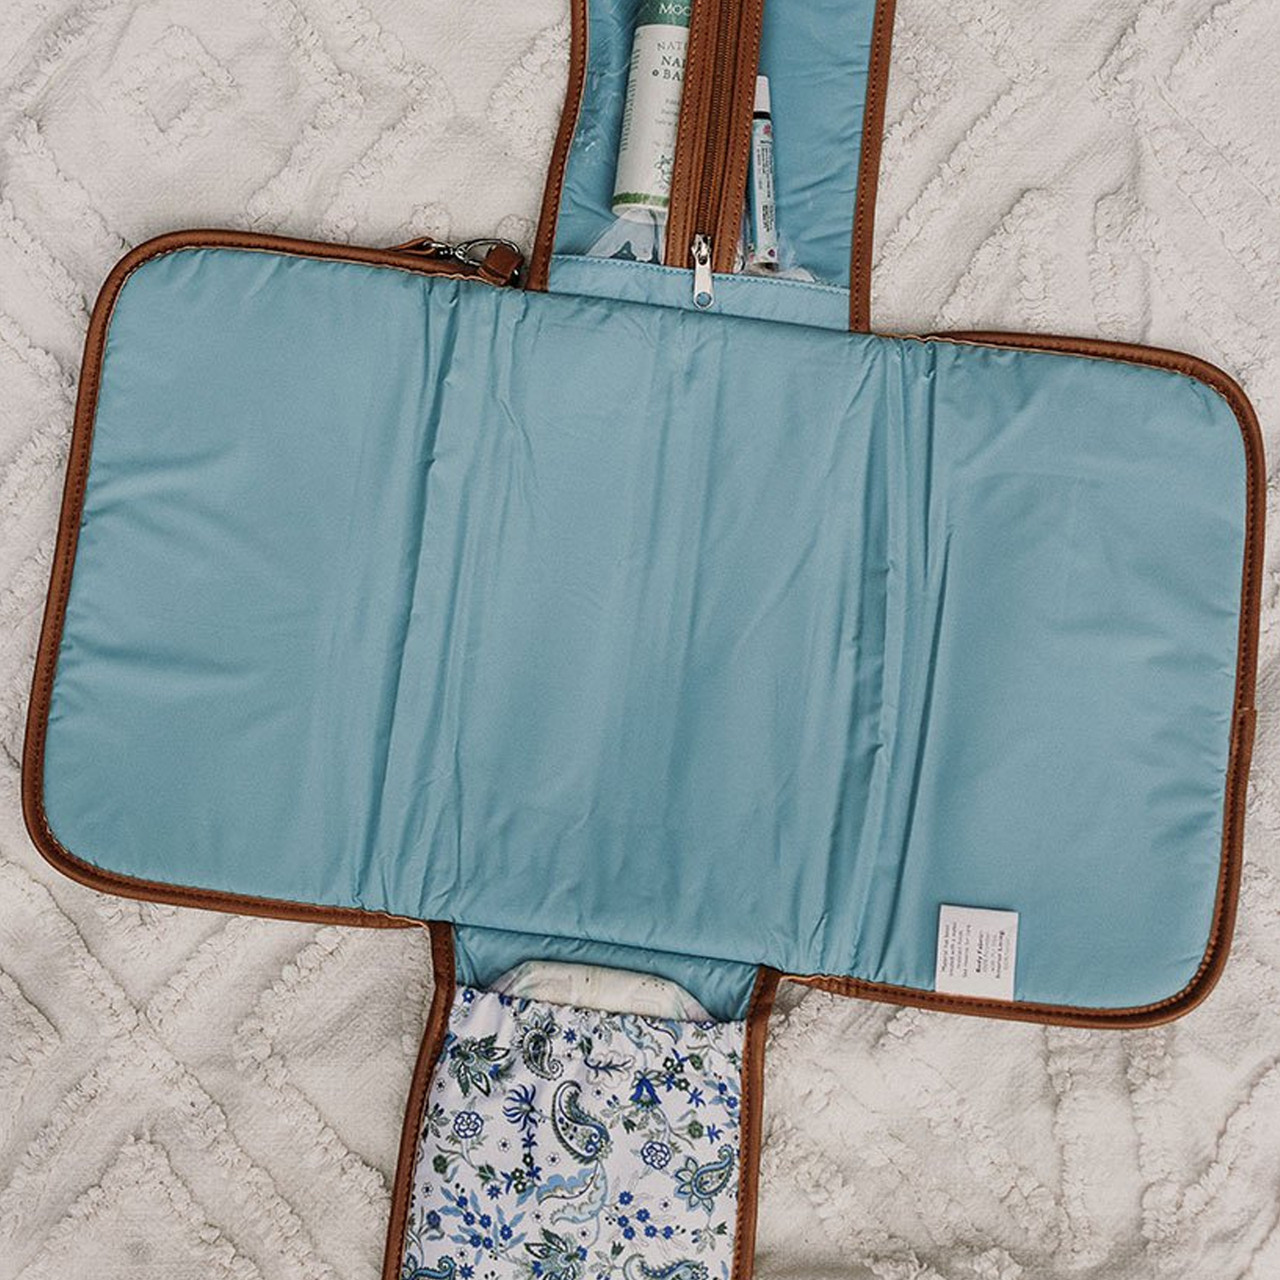 OiOi Baby Change Clutch Blue Paisley/Tan - Shop Changing Mats Online